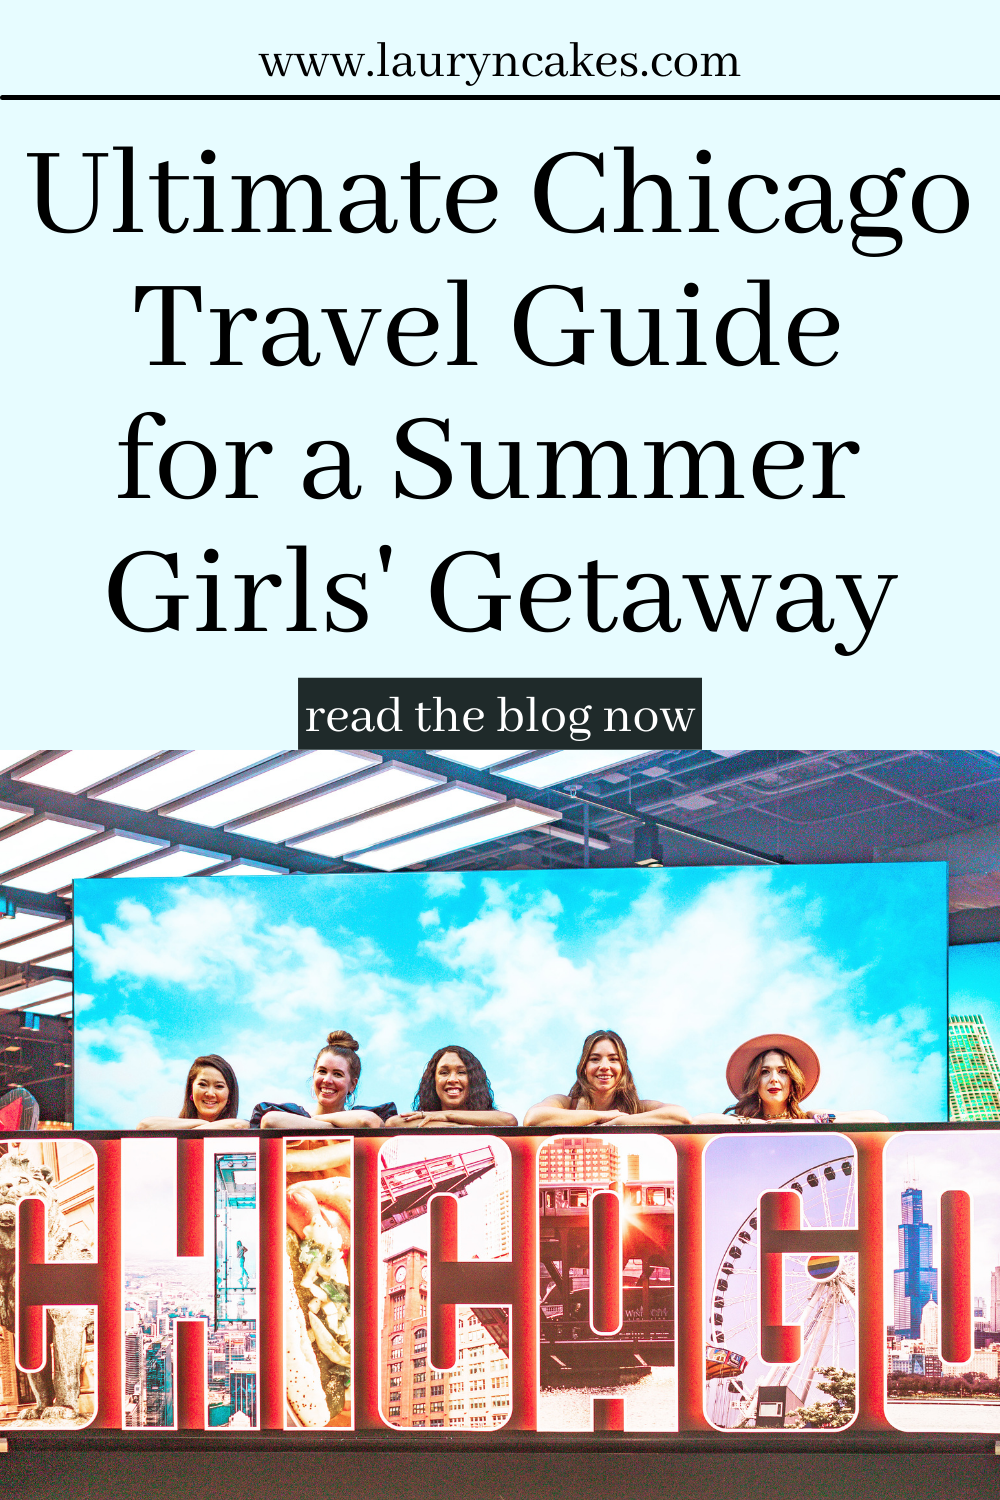 image of 5 women (Babes That Wander) standing behind a Chicago light up sign. The image says, "Ultimate Chicago Travel guide for a Summer Girls' Getaway"